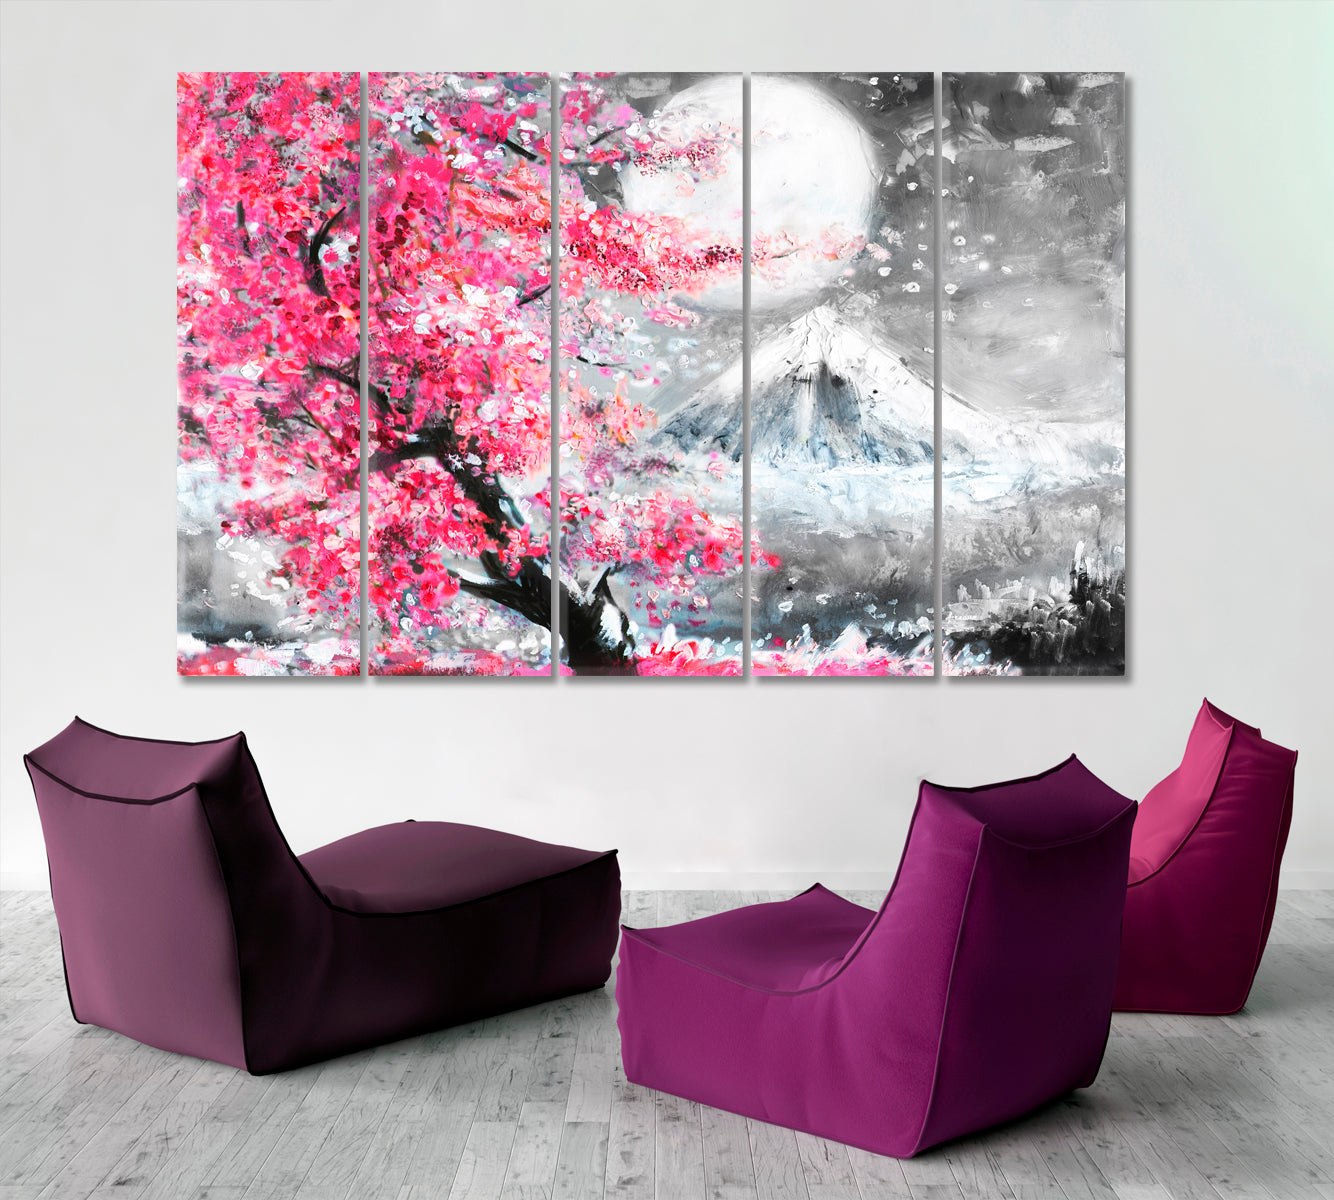 Landscape With Sakura And Mountain Asian Style Canvas Print Wall Art Artesty 5 panels 36" x 24" 